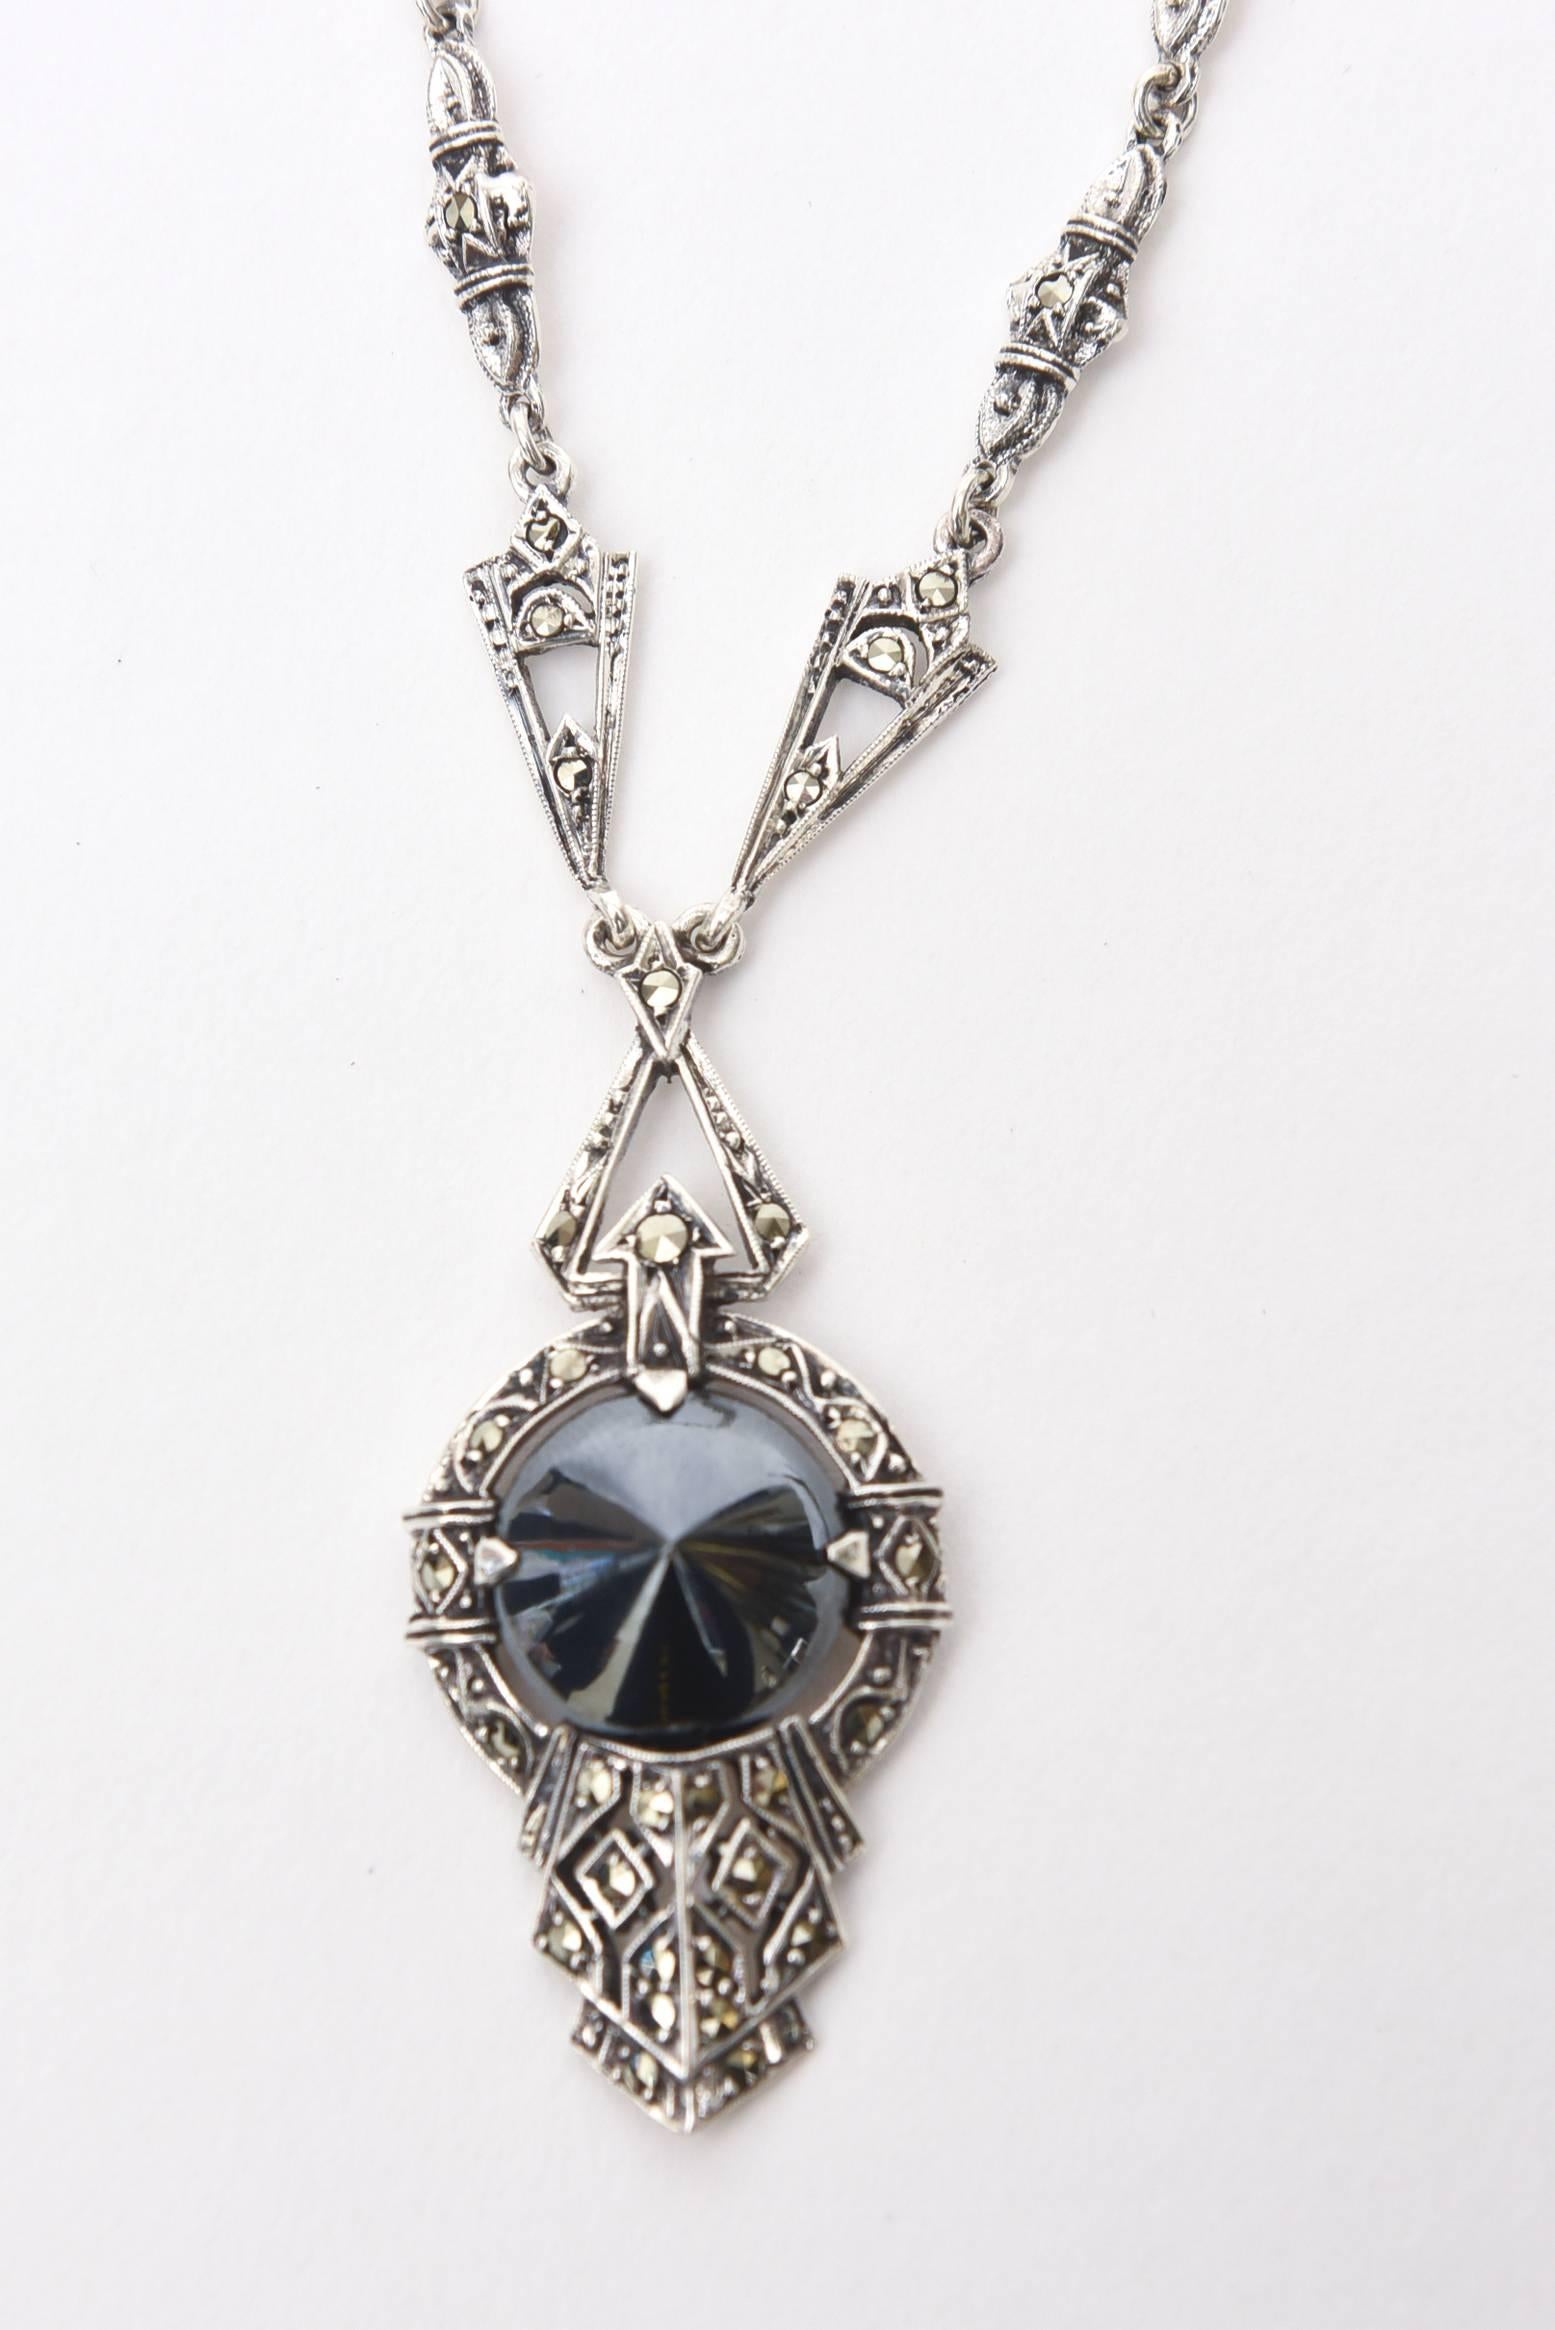 This elegant lovely art deco necklace is a semi precious stone of hematite set against sterling silver and marcasite. The hematite stone which is a mineral looks like moonstone and is a dark grey black. It has healing qualities of stimulation of the